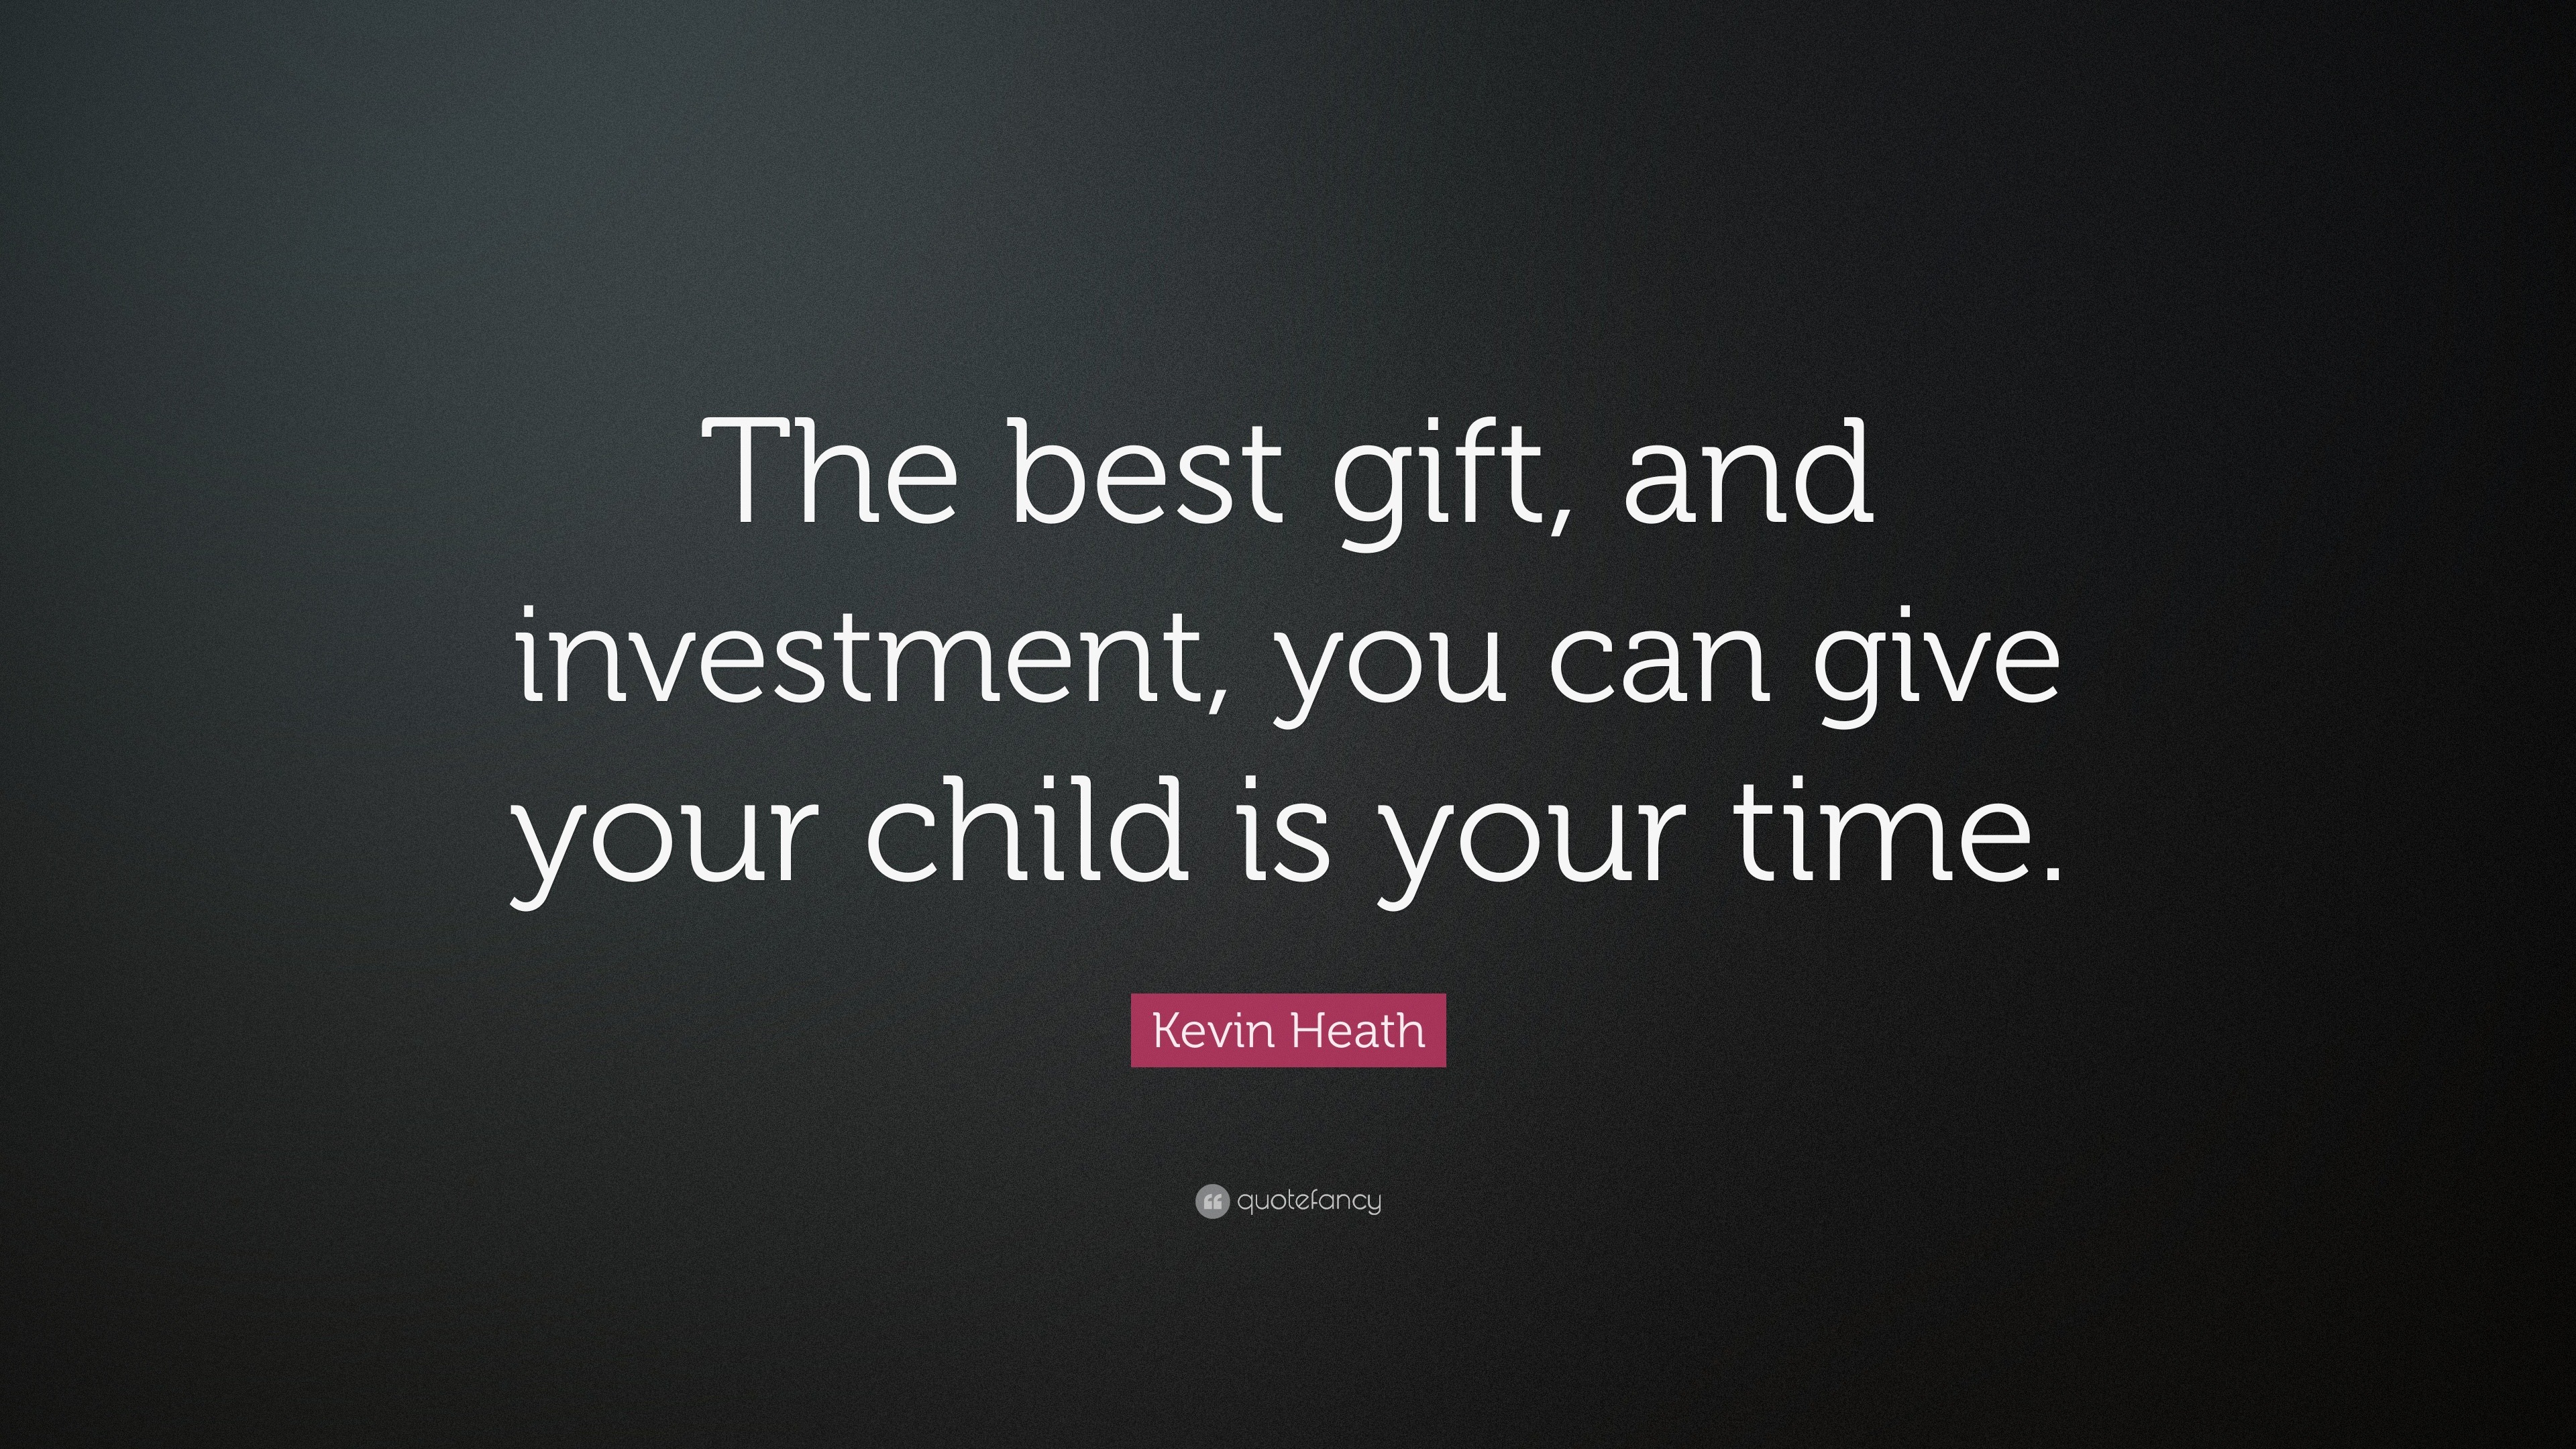 Kevin Heath Quote: “The best gift, and investment, you can give your child  is your time.”